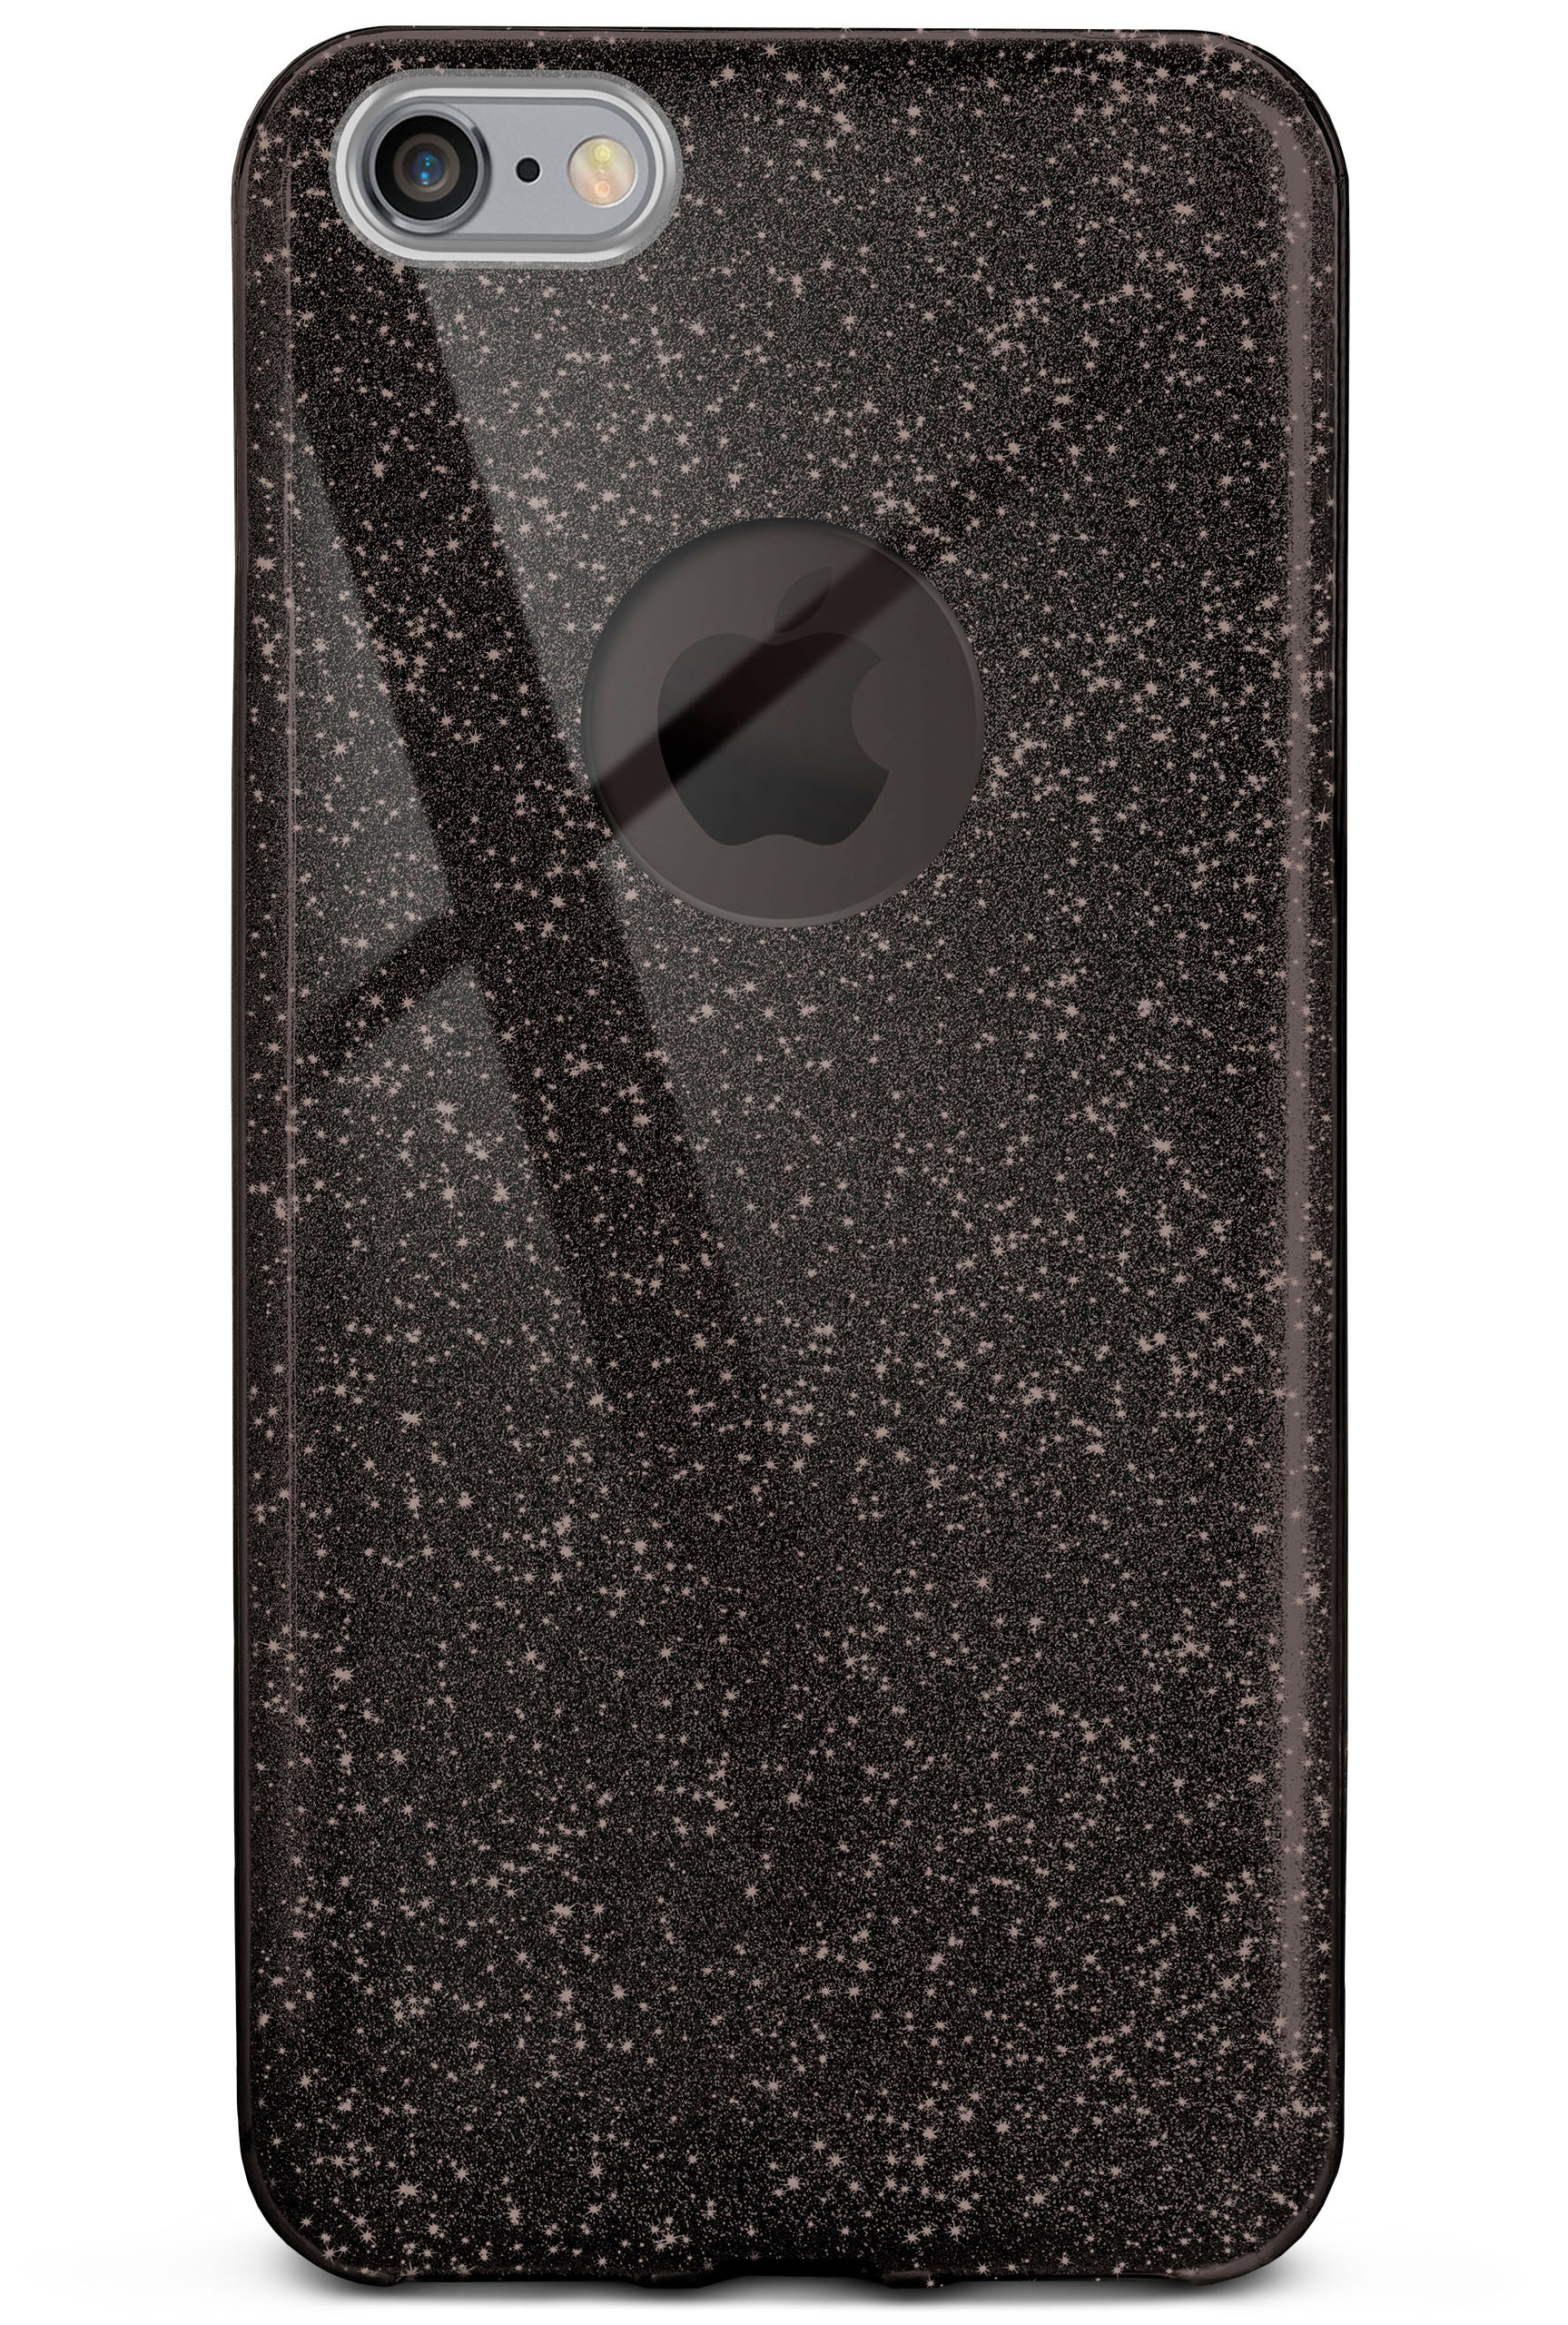 ONEFLOW iPhone Case, - Apple, Glitter / Black 6s 6, iPhone Backcover, Glamour